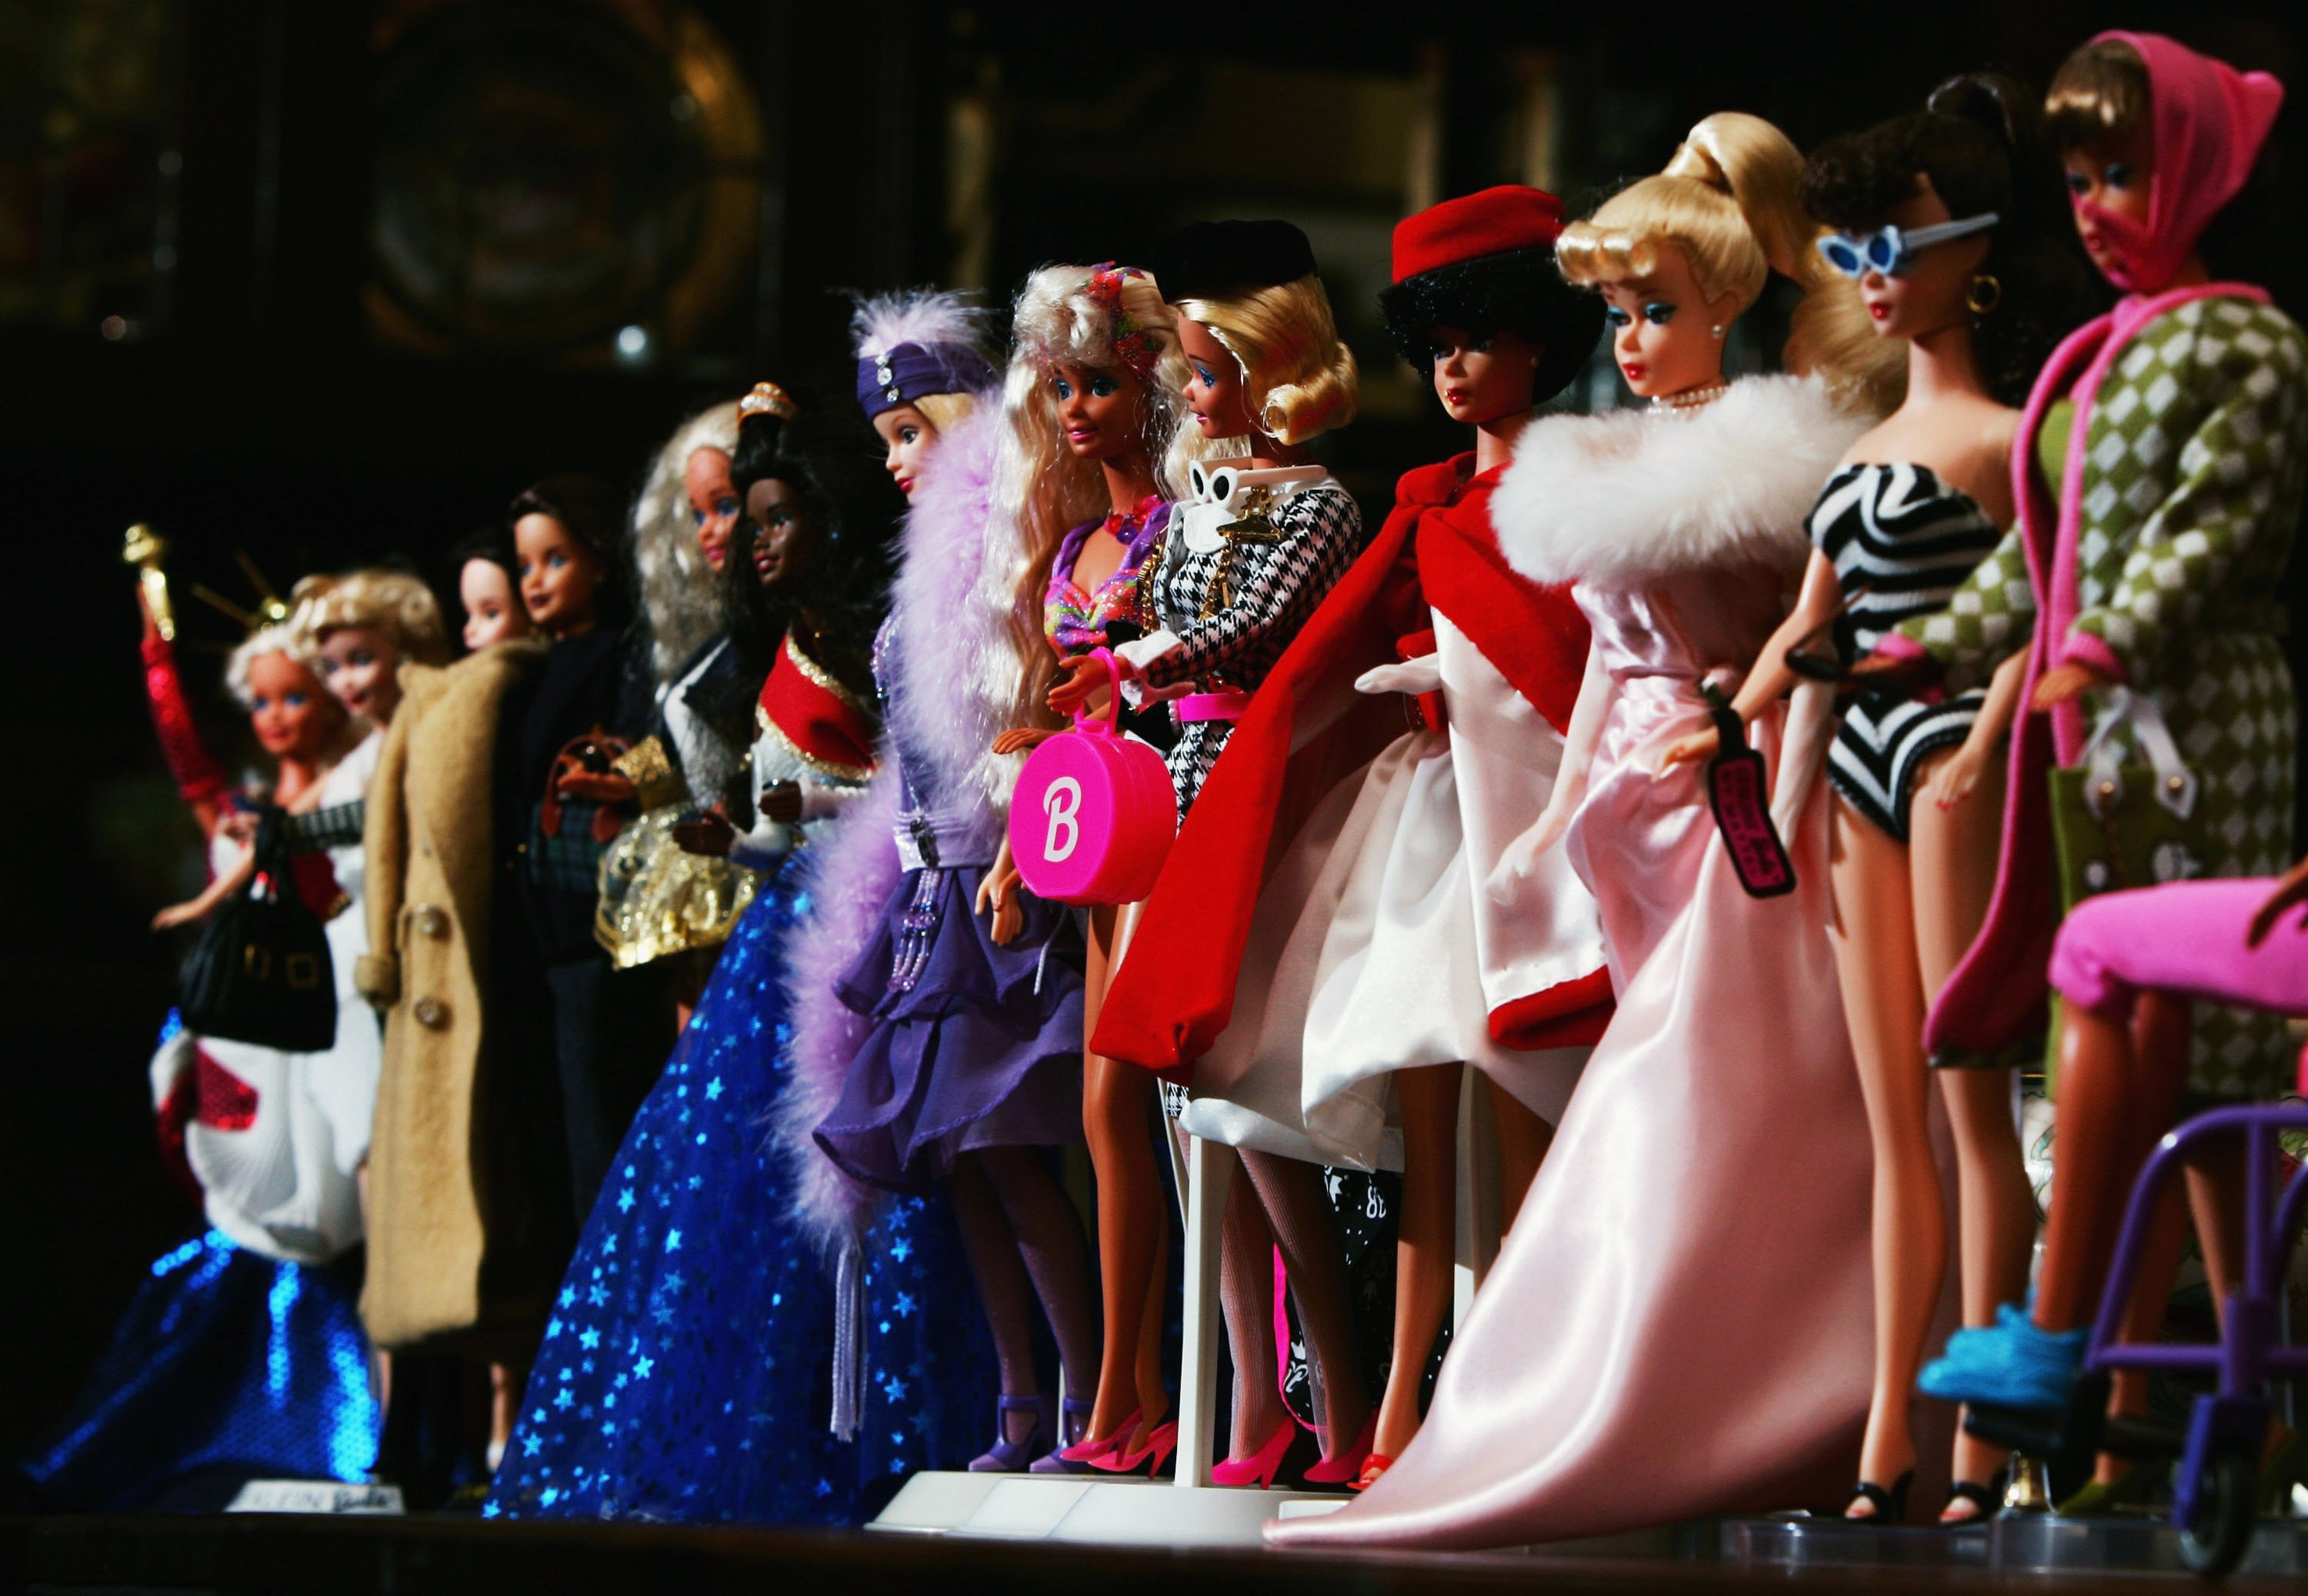 Barbie dolls at Leuralla NSW toy and railway museum in Sydney, Australia on May 18, 2007. (Ian Waldie—Getty Images)